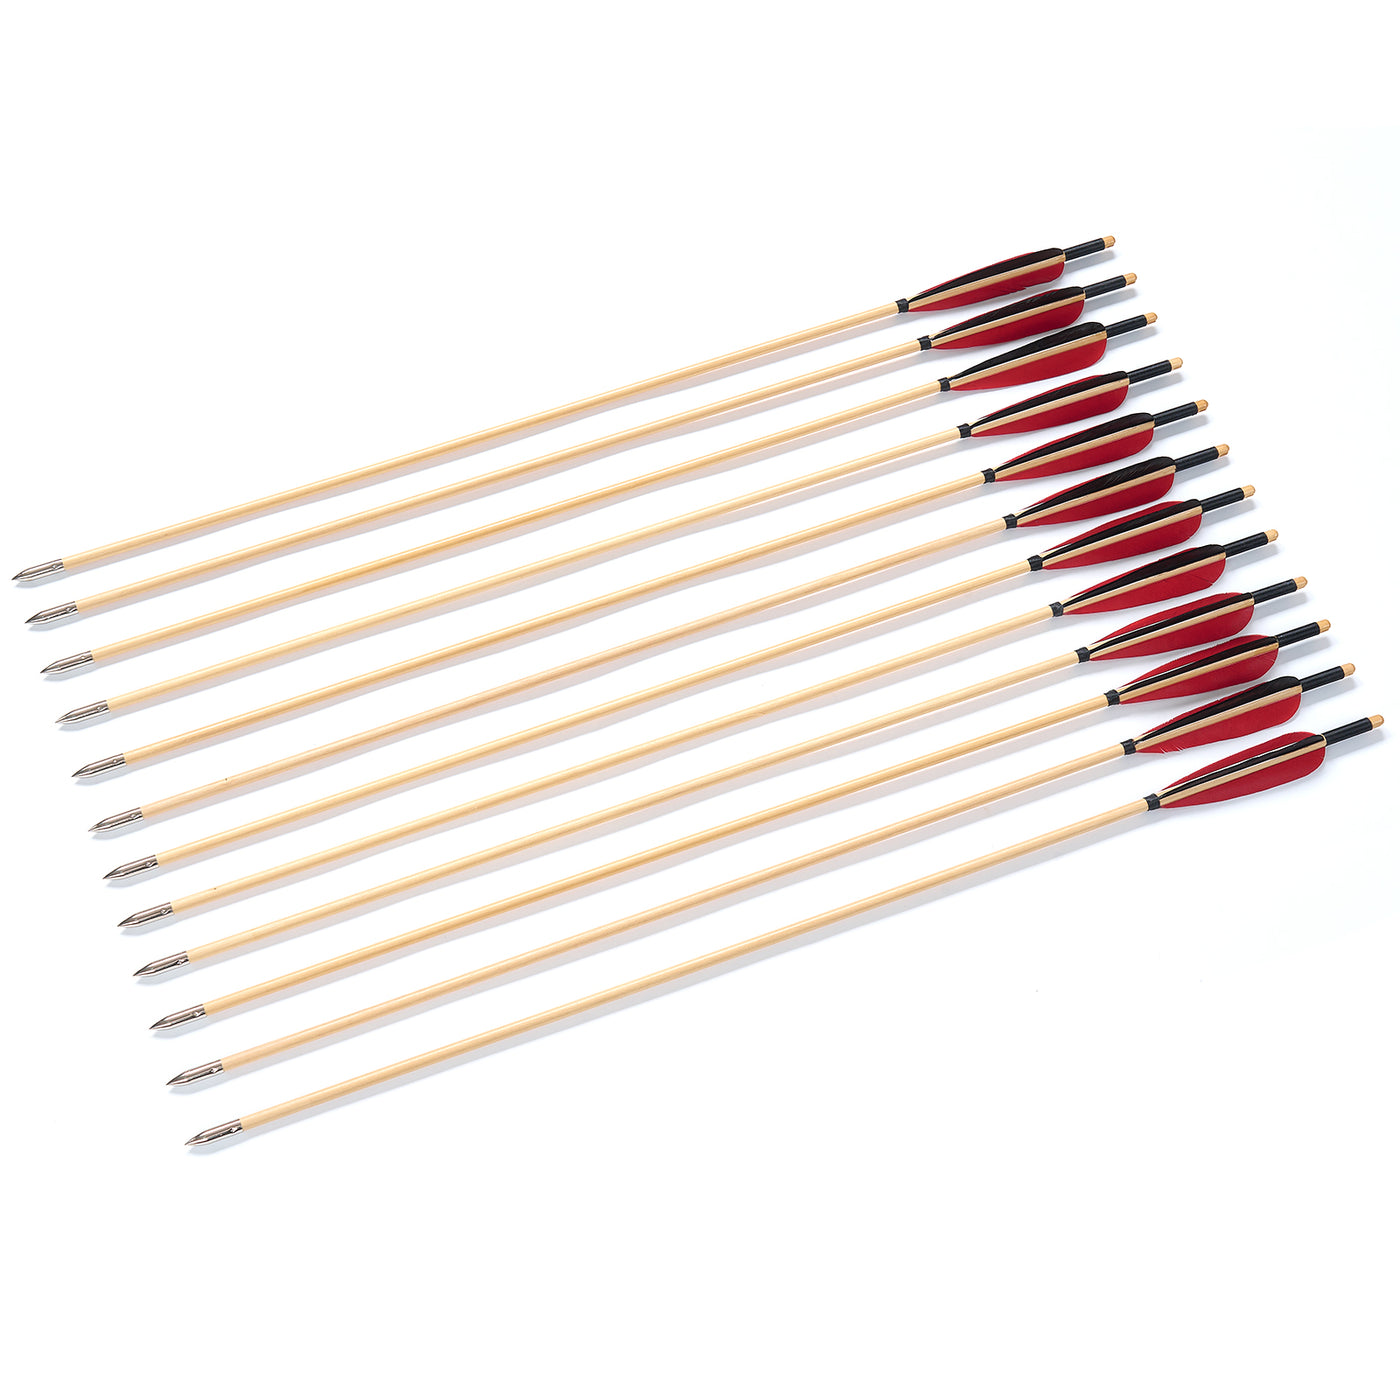 12x 32" OD 8mm Fletched Trad Archery Wooden Arrows 5in Black/Red Turkey Feather Target Field Points Handmade For Recurve Bow Longbow Practice Shooting